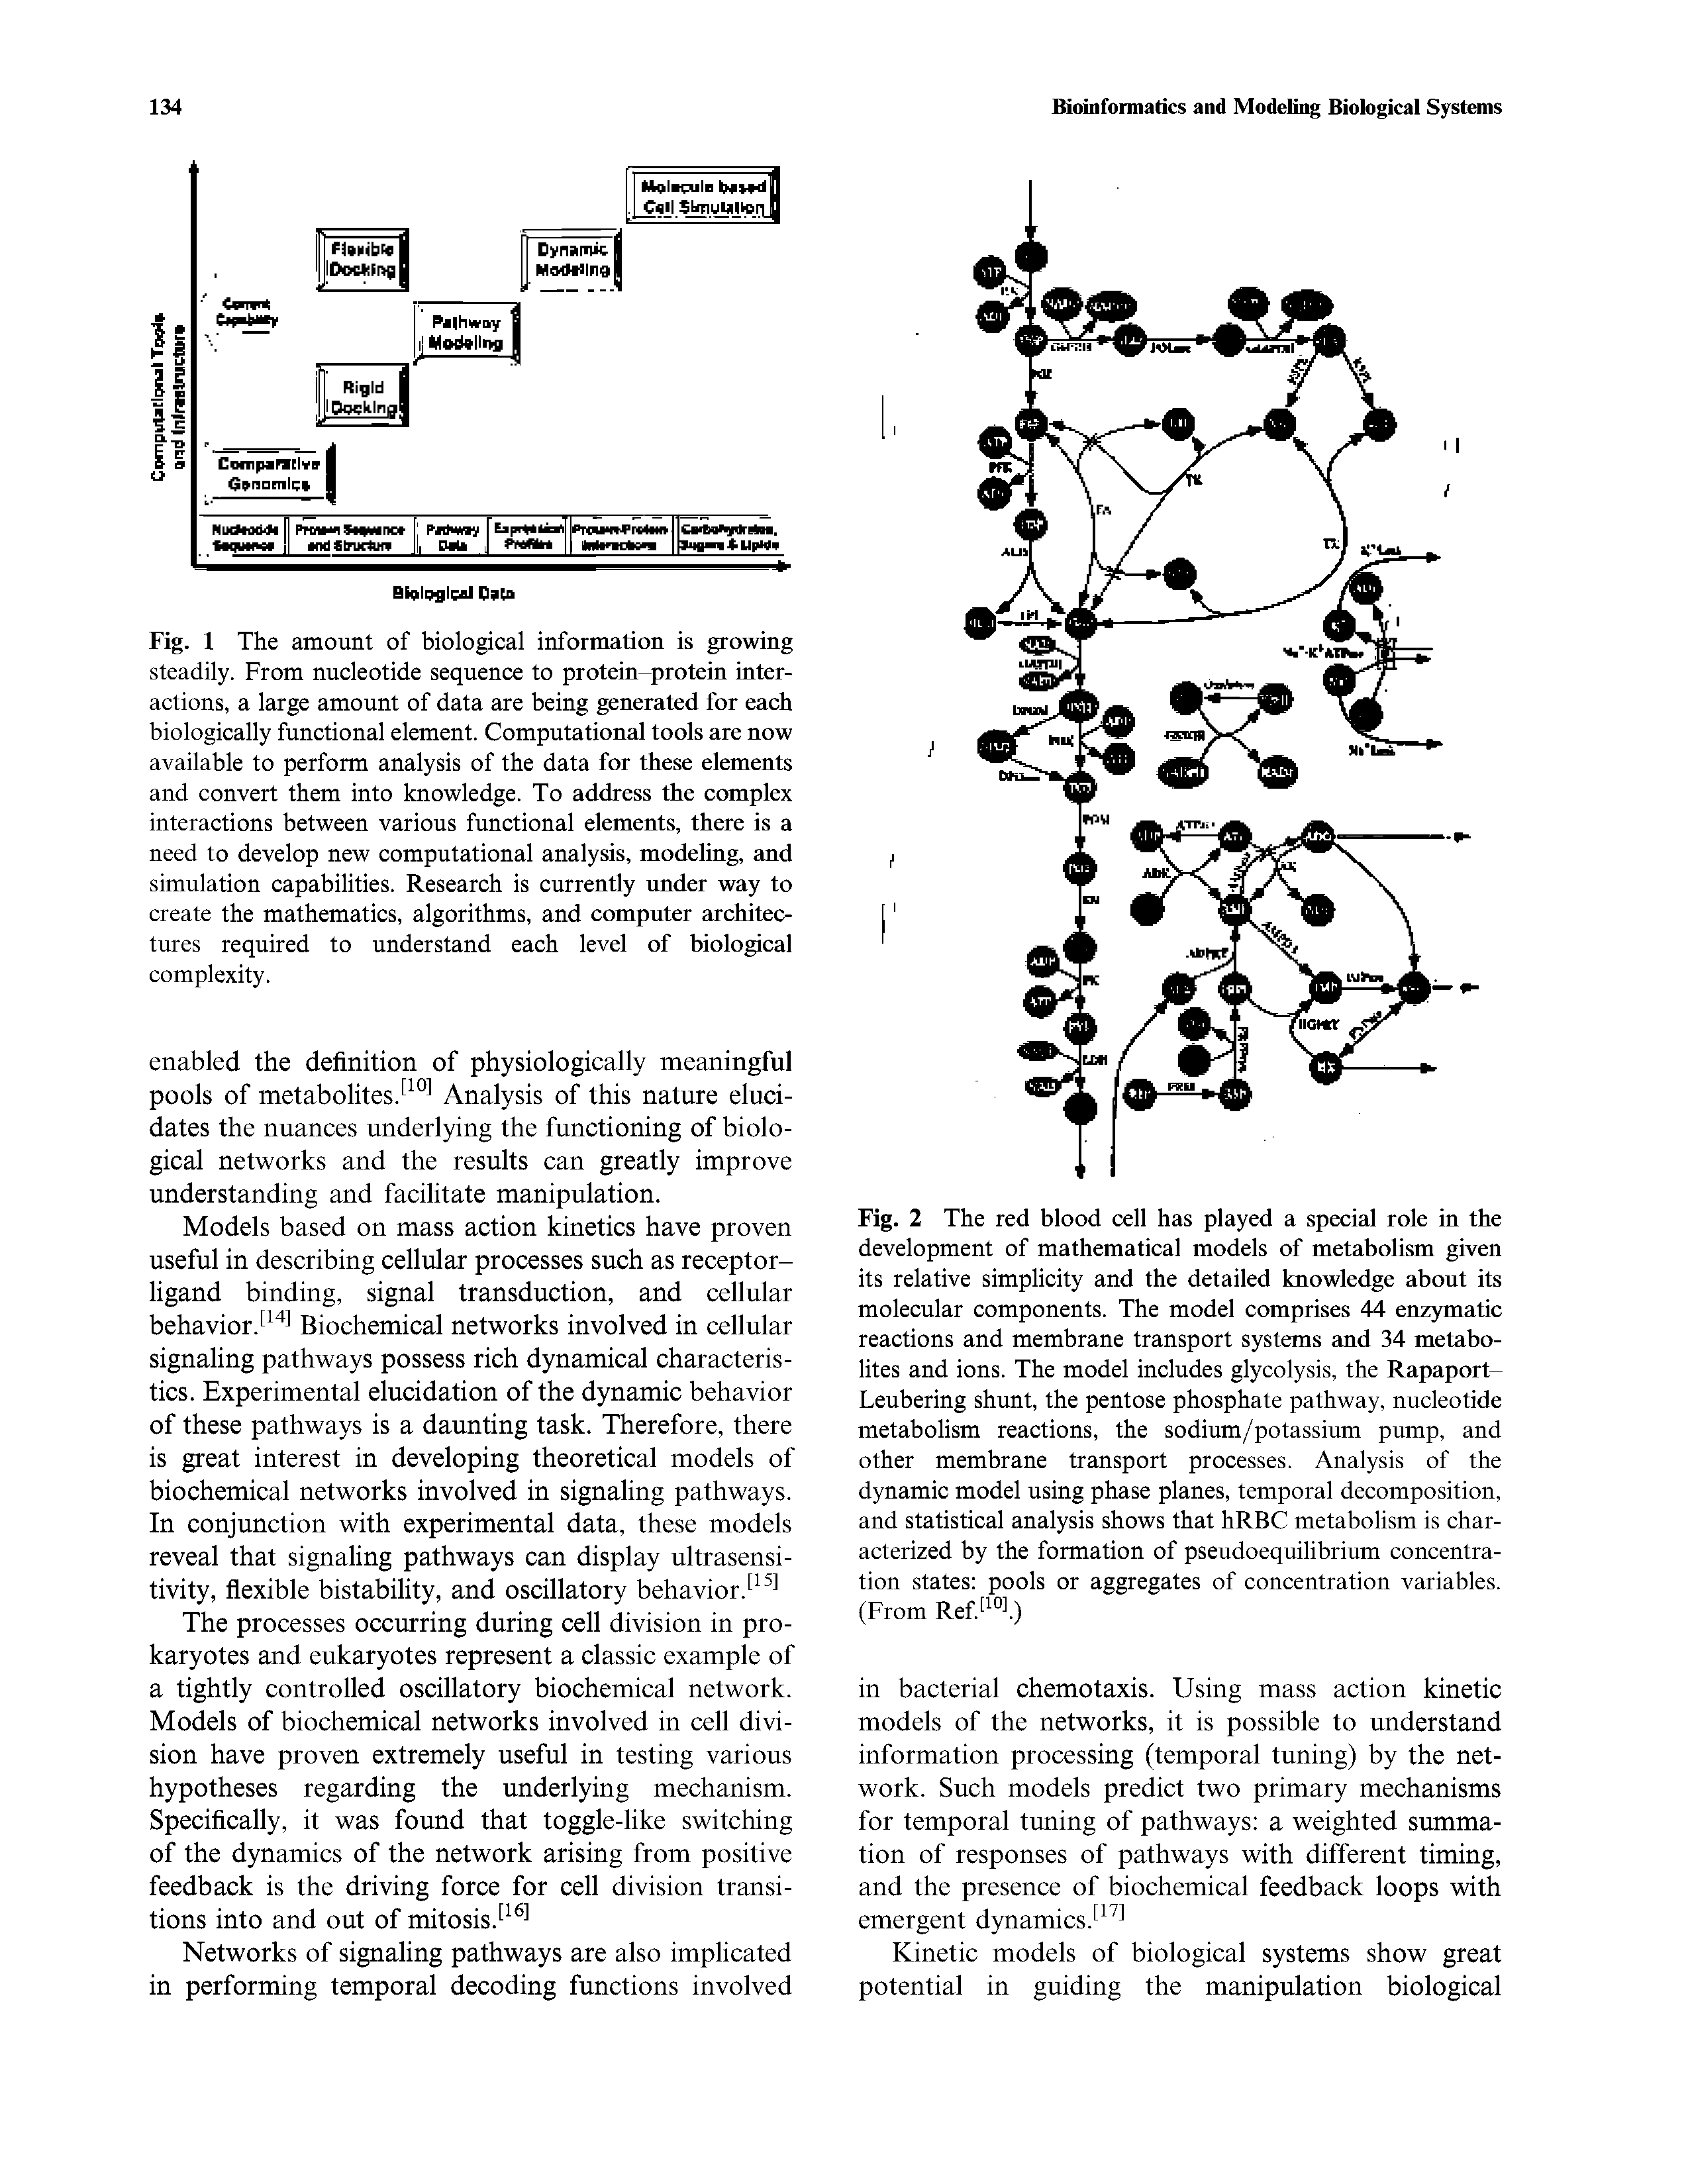 Fig. 2 The red blood cell has played a special role in the development of mathematical models of metabolism given its relative simplicity and the detailed knowledge about its molecular components. The model comprises 44 enzymatic reactions and membrane transport systems and 34 metabolites and ions. The model includes glycolysis, the Rapaport-Leubering shunt, the pentose phosphate pathway, nucleotide metabolism reactions, the sodium/potassium pump, and other membrane transport processes. Analysis of the dynamic model using phase planes, temporal decomposition, and statistical analysis shows that hRBC metabolism is characterized by the formation of pseudoequilibrium concentration states pools or aggregates of concentration variables. (From Ref...